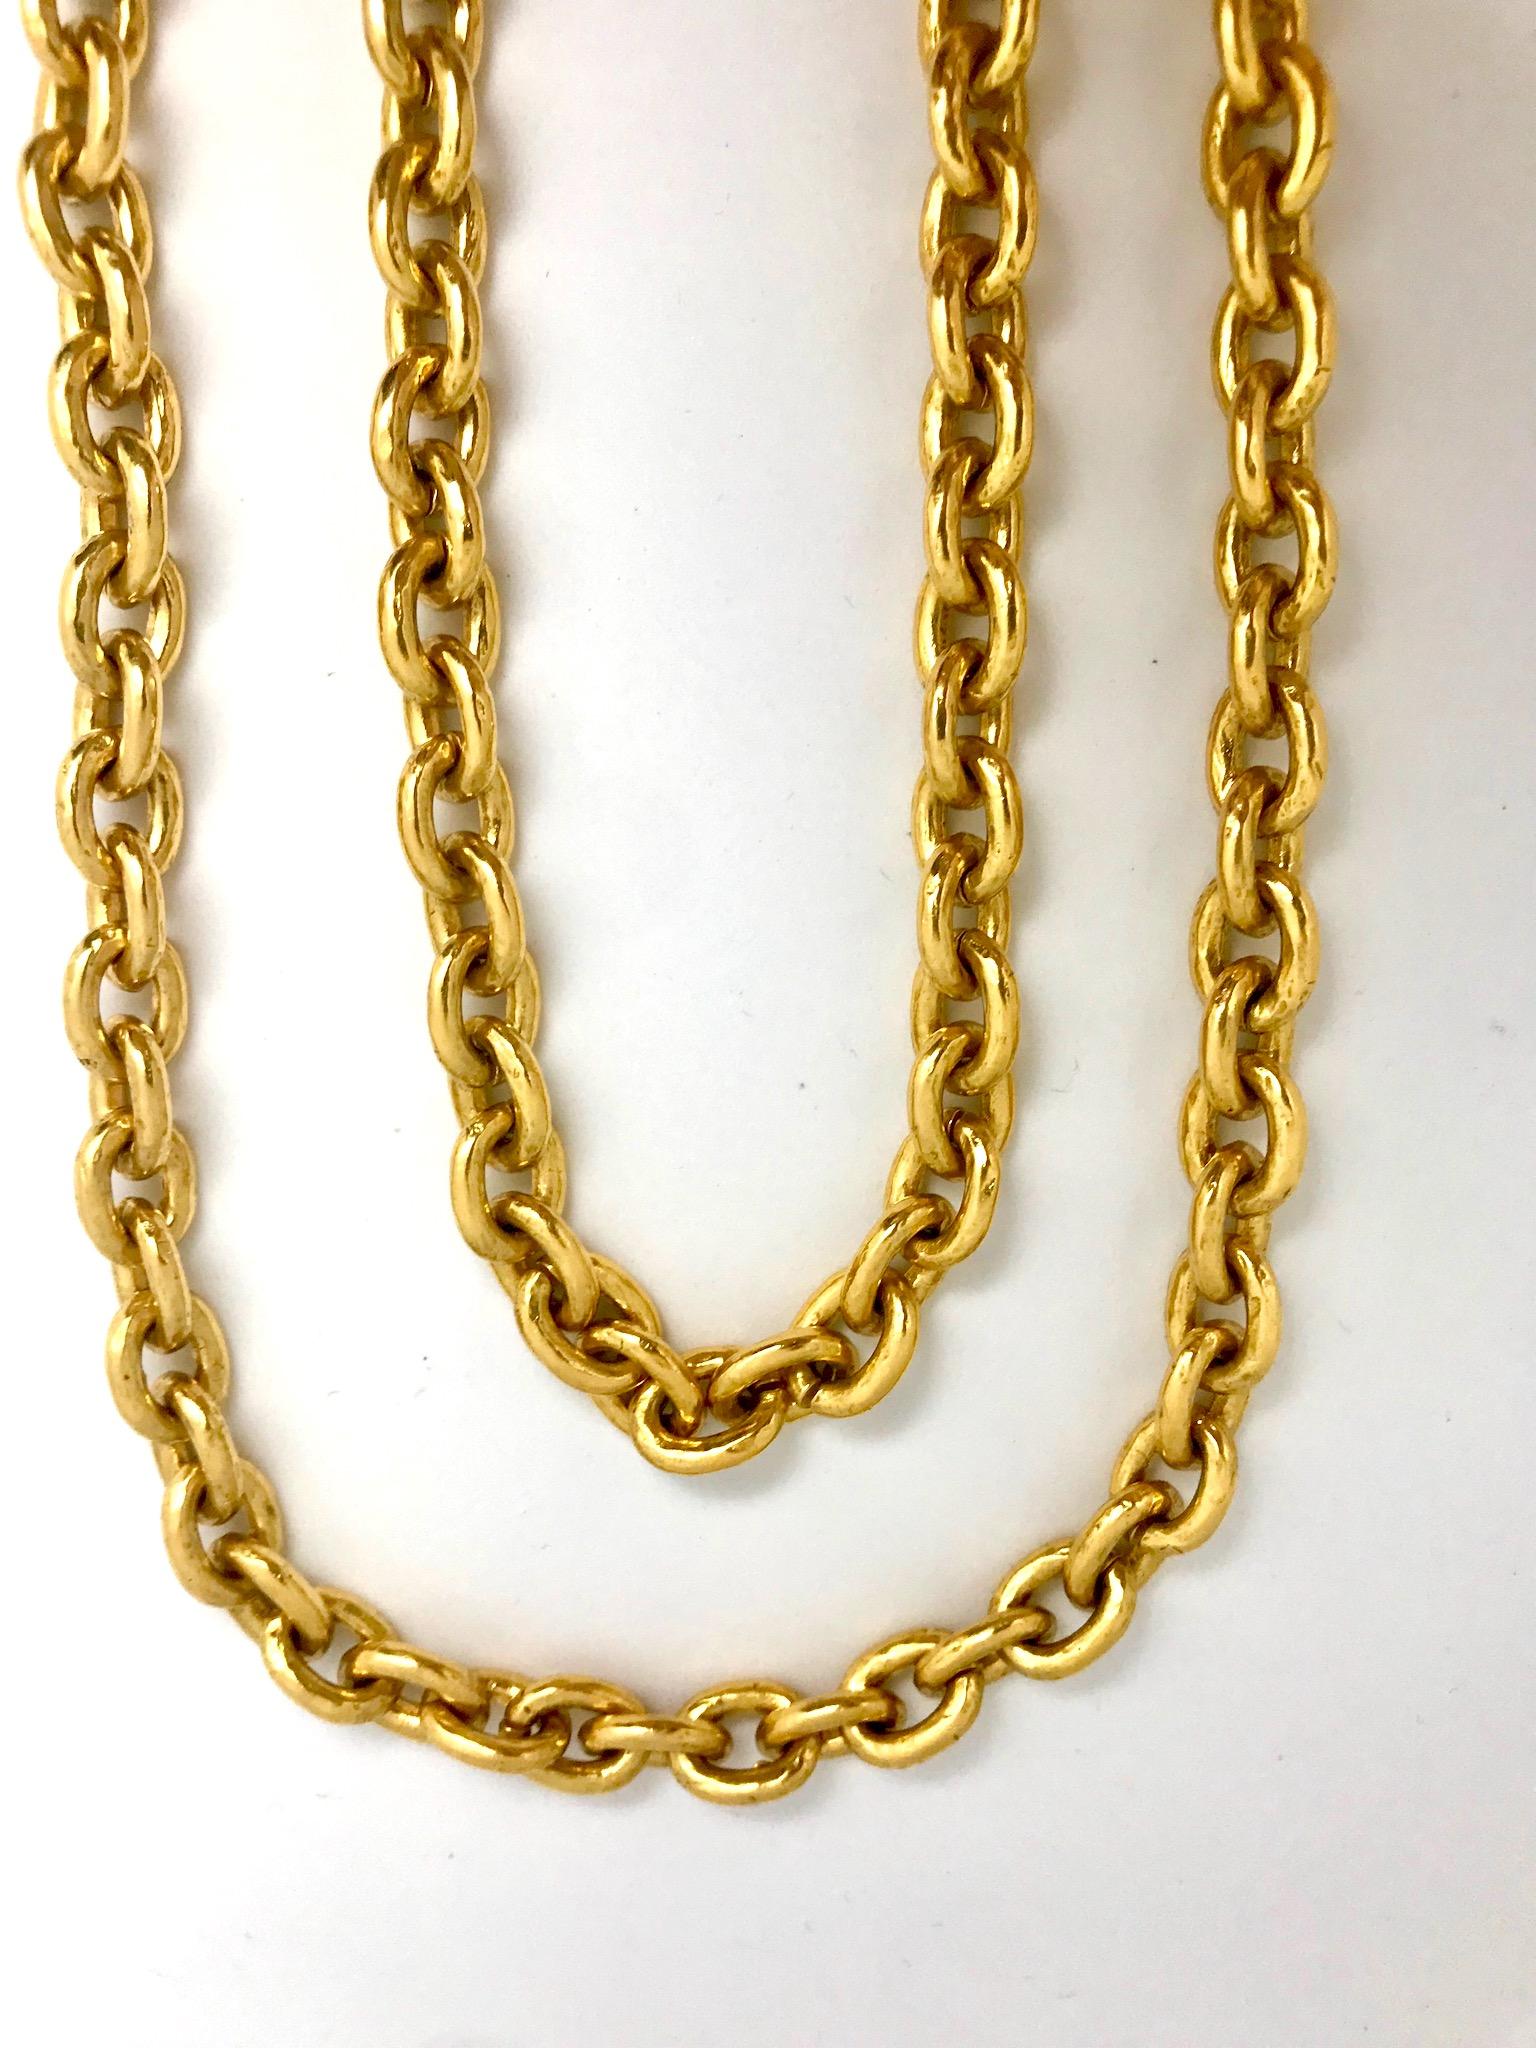 Women's or Men's Chanel Pendant Necklace Spring 1994 Collection